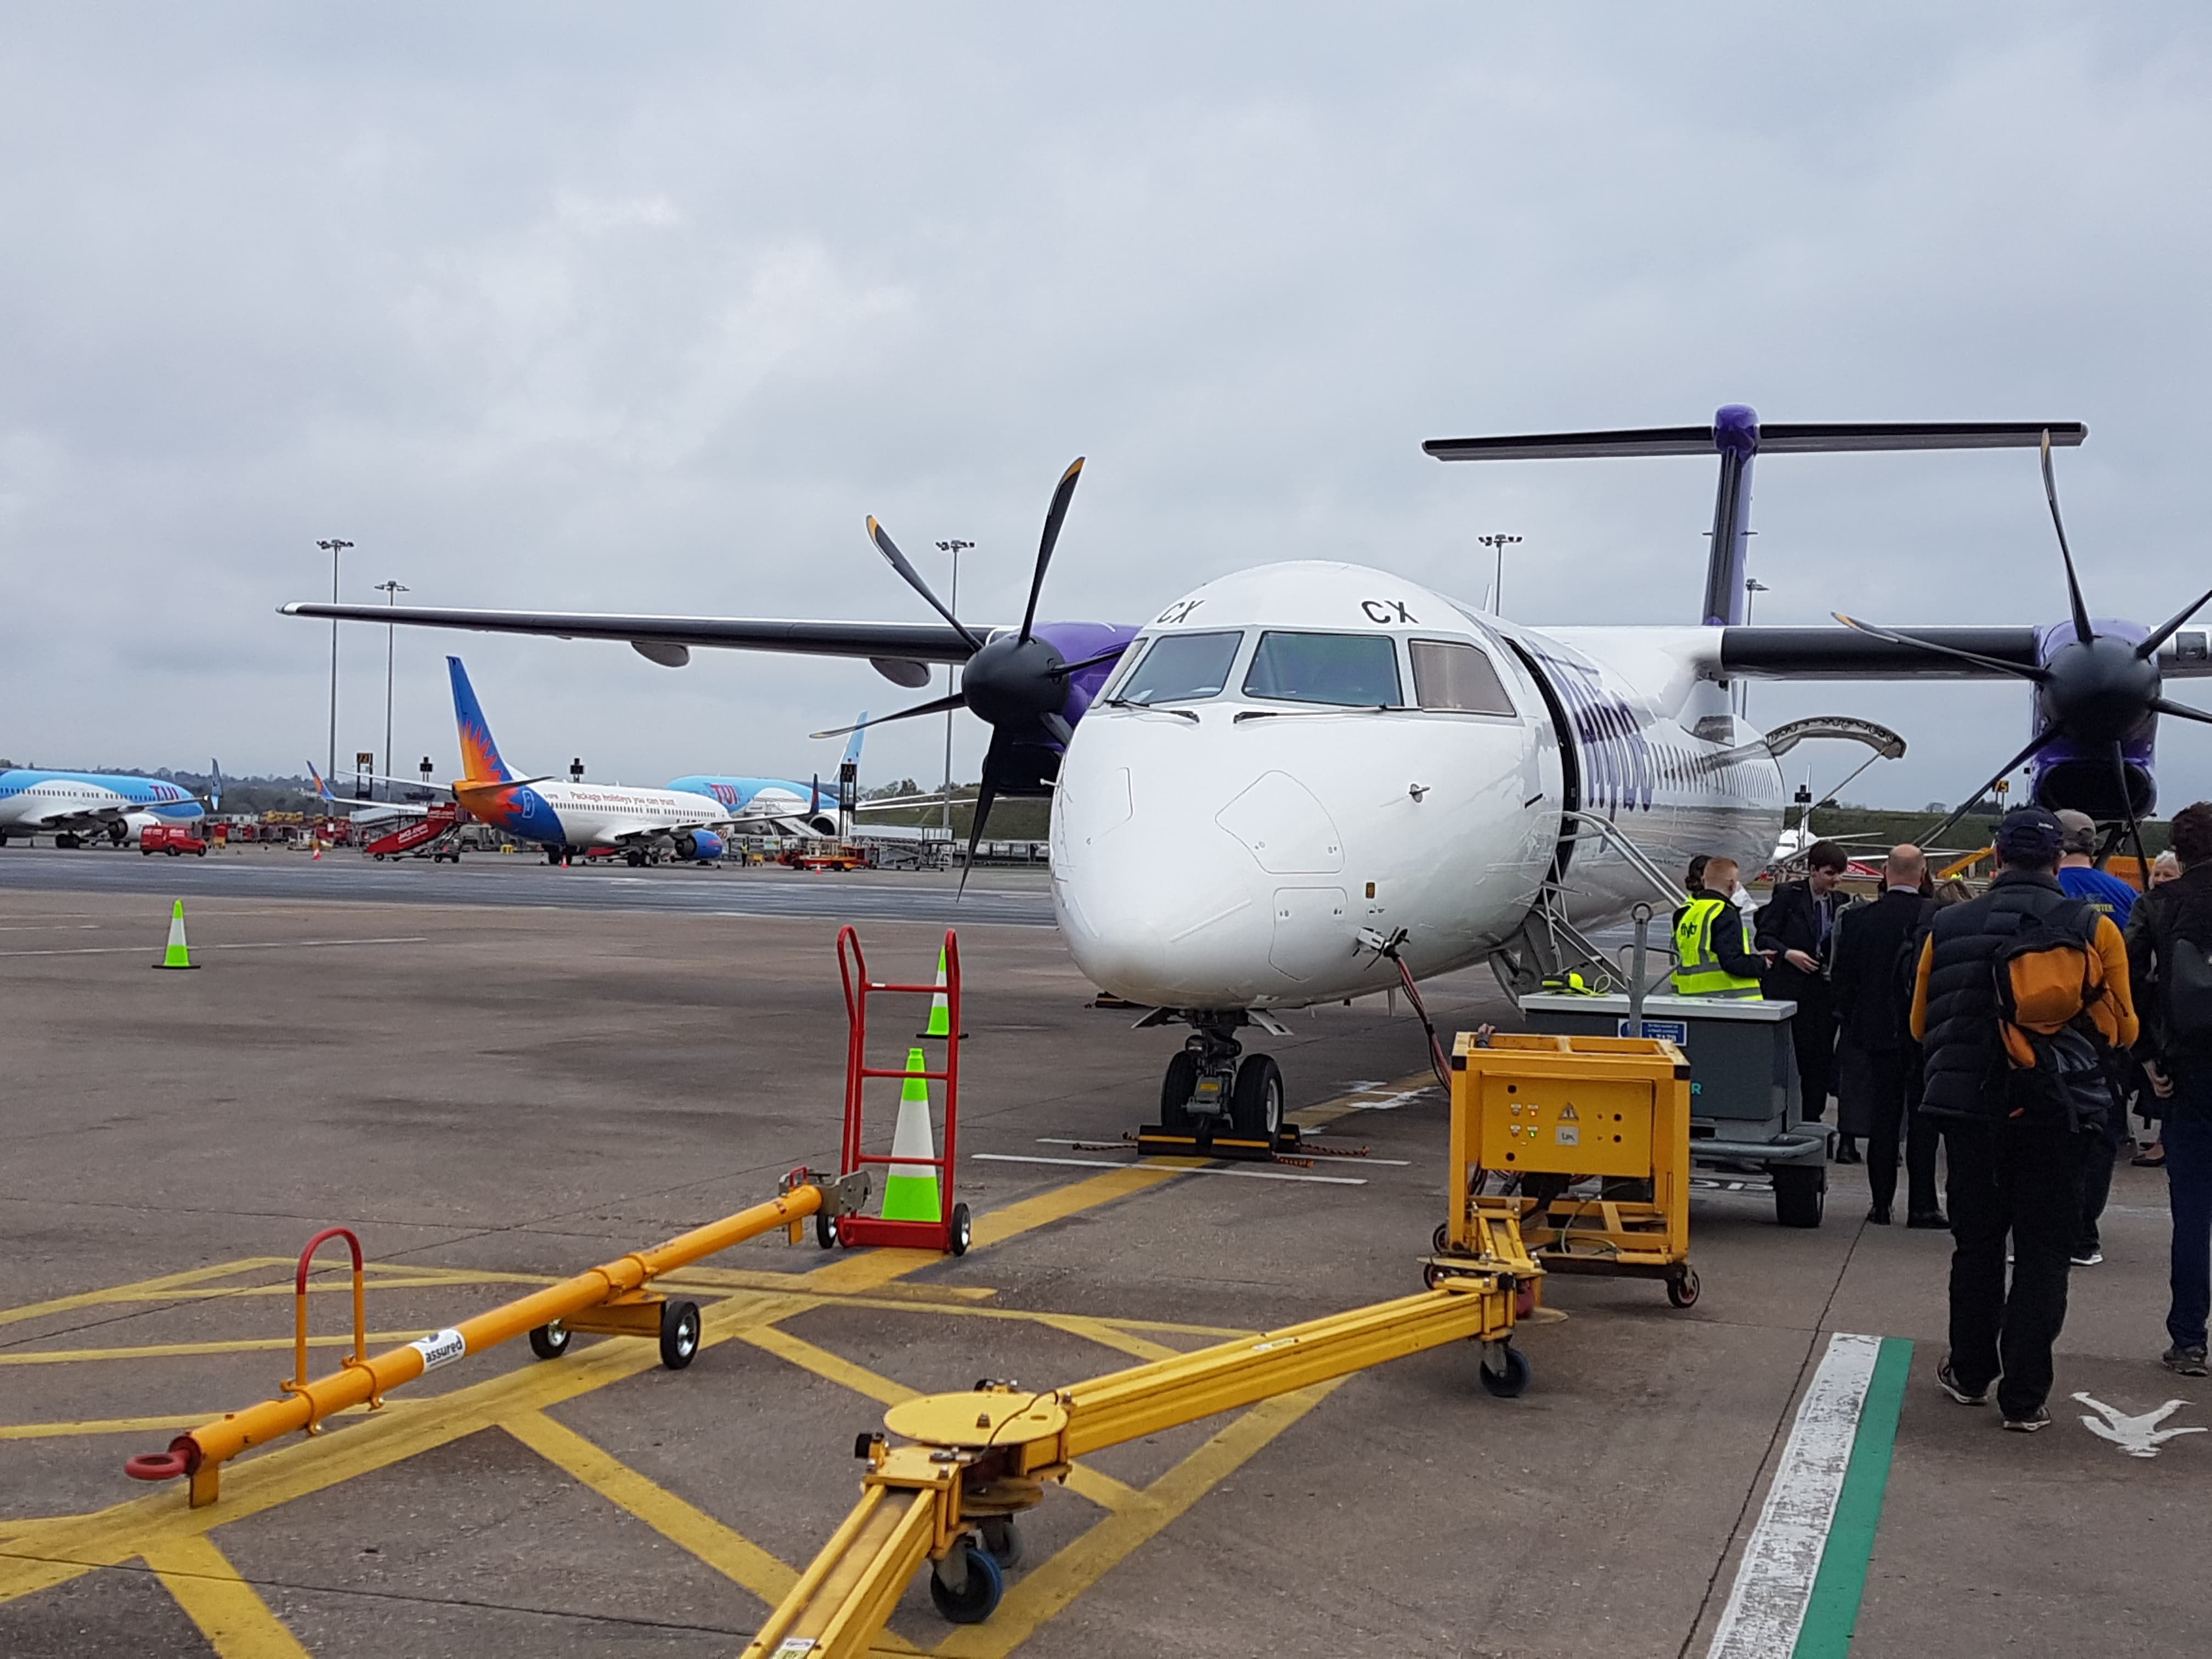 flybe's first revenue-generating service in April 2022